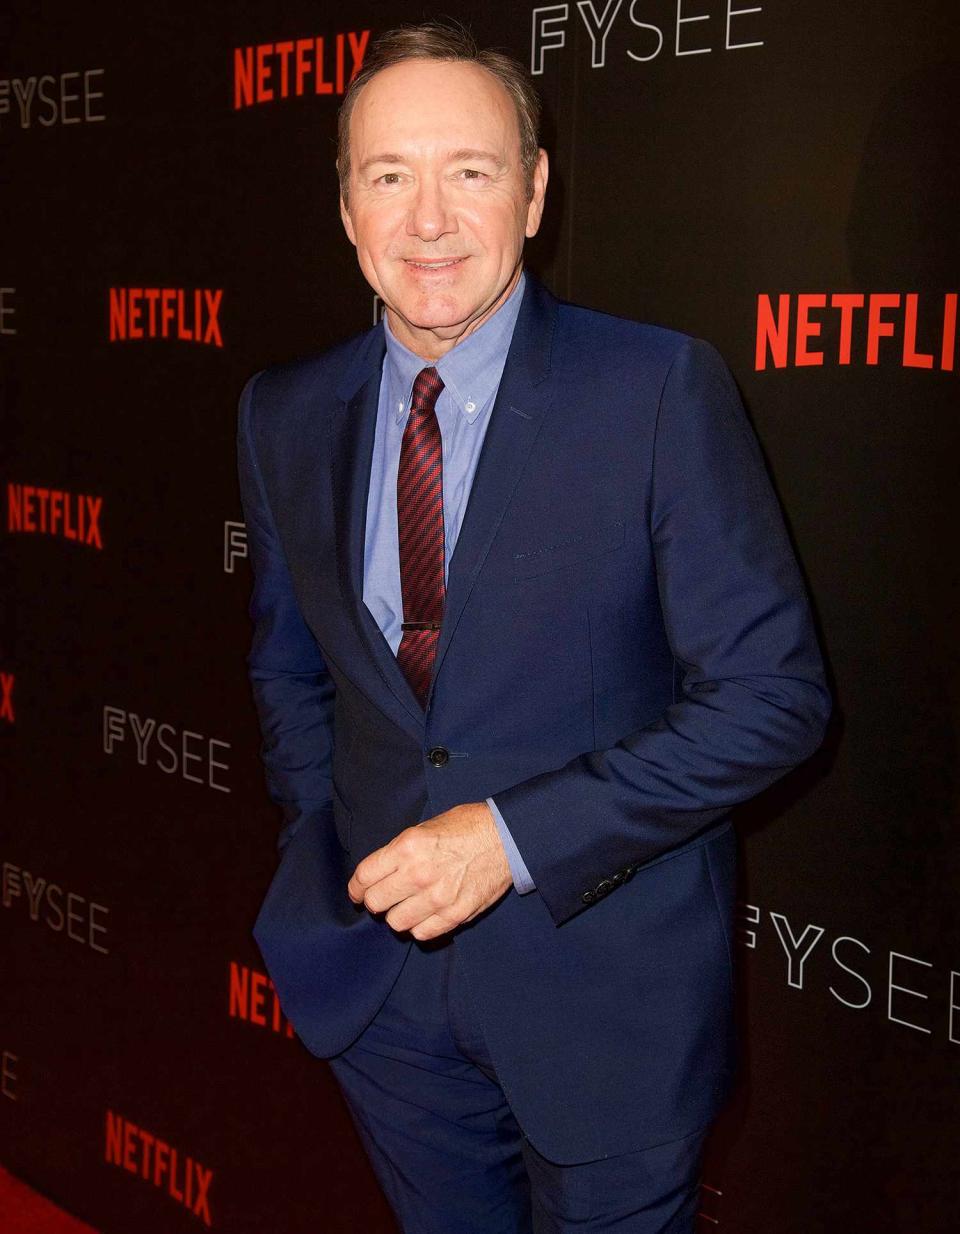 Netflix's "House Of Cards" for your consideration event - Red Carpet